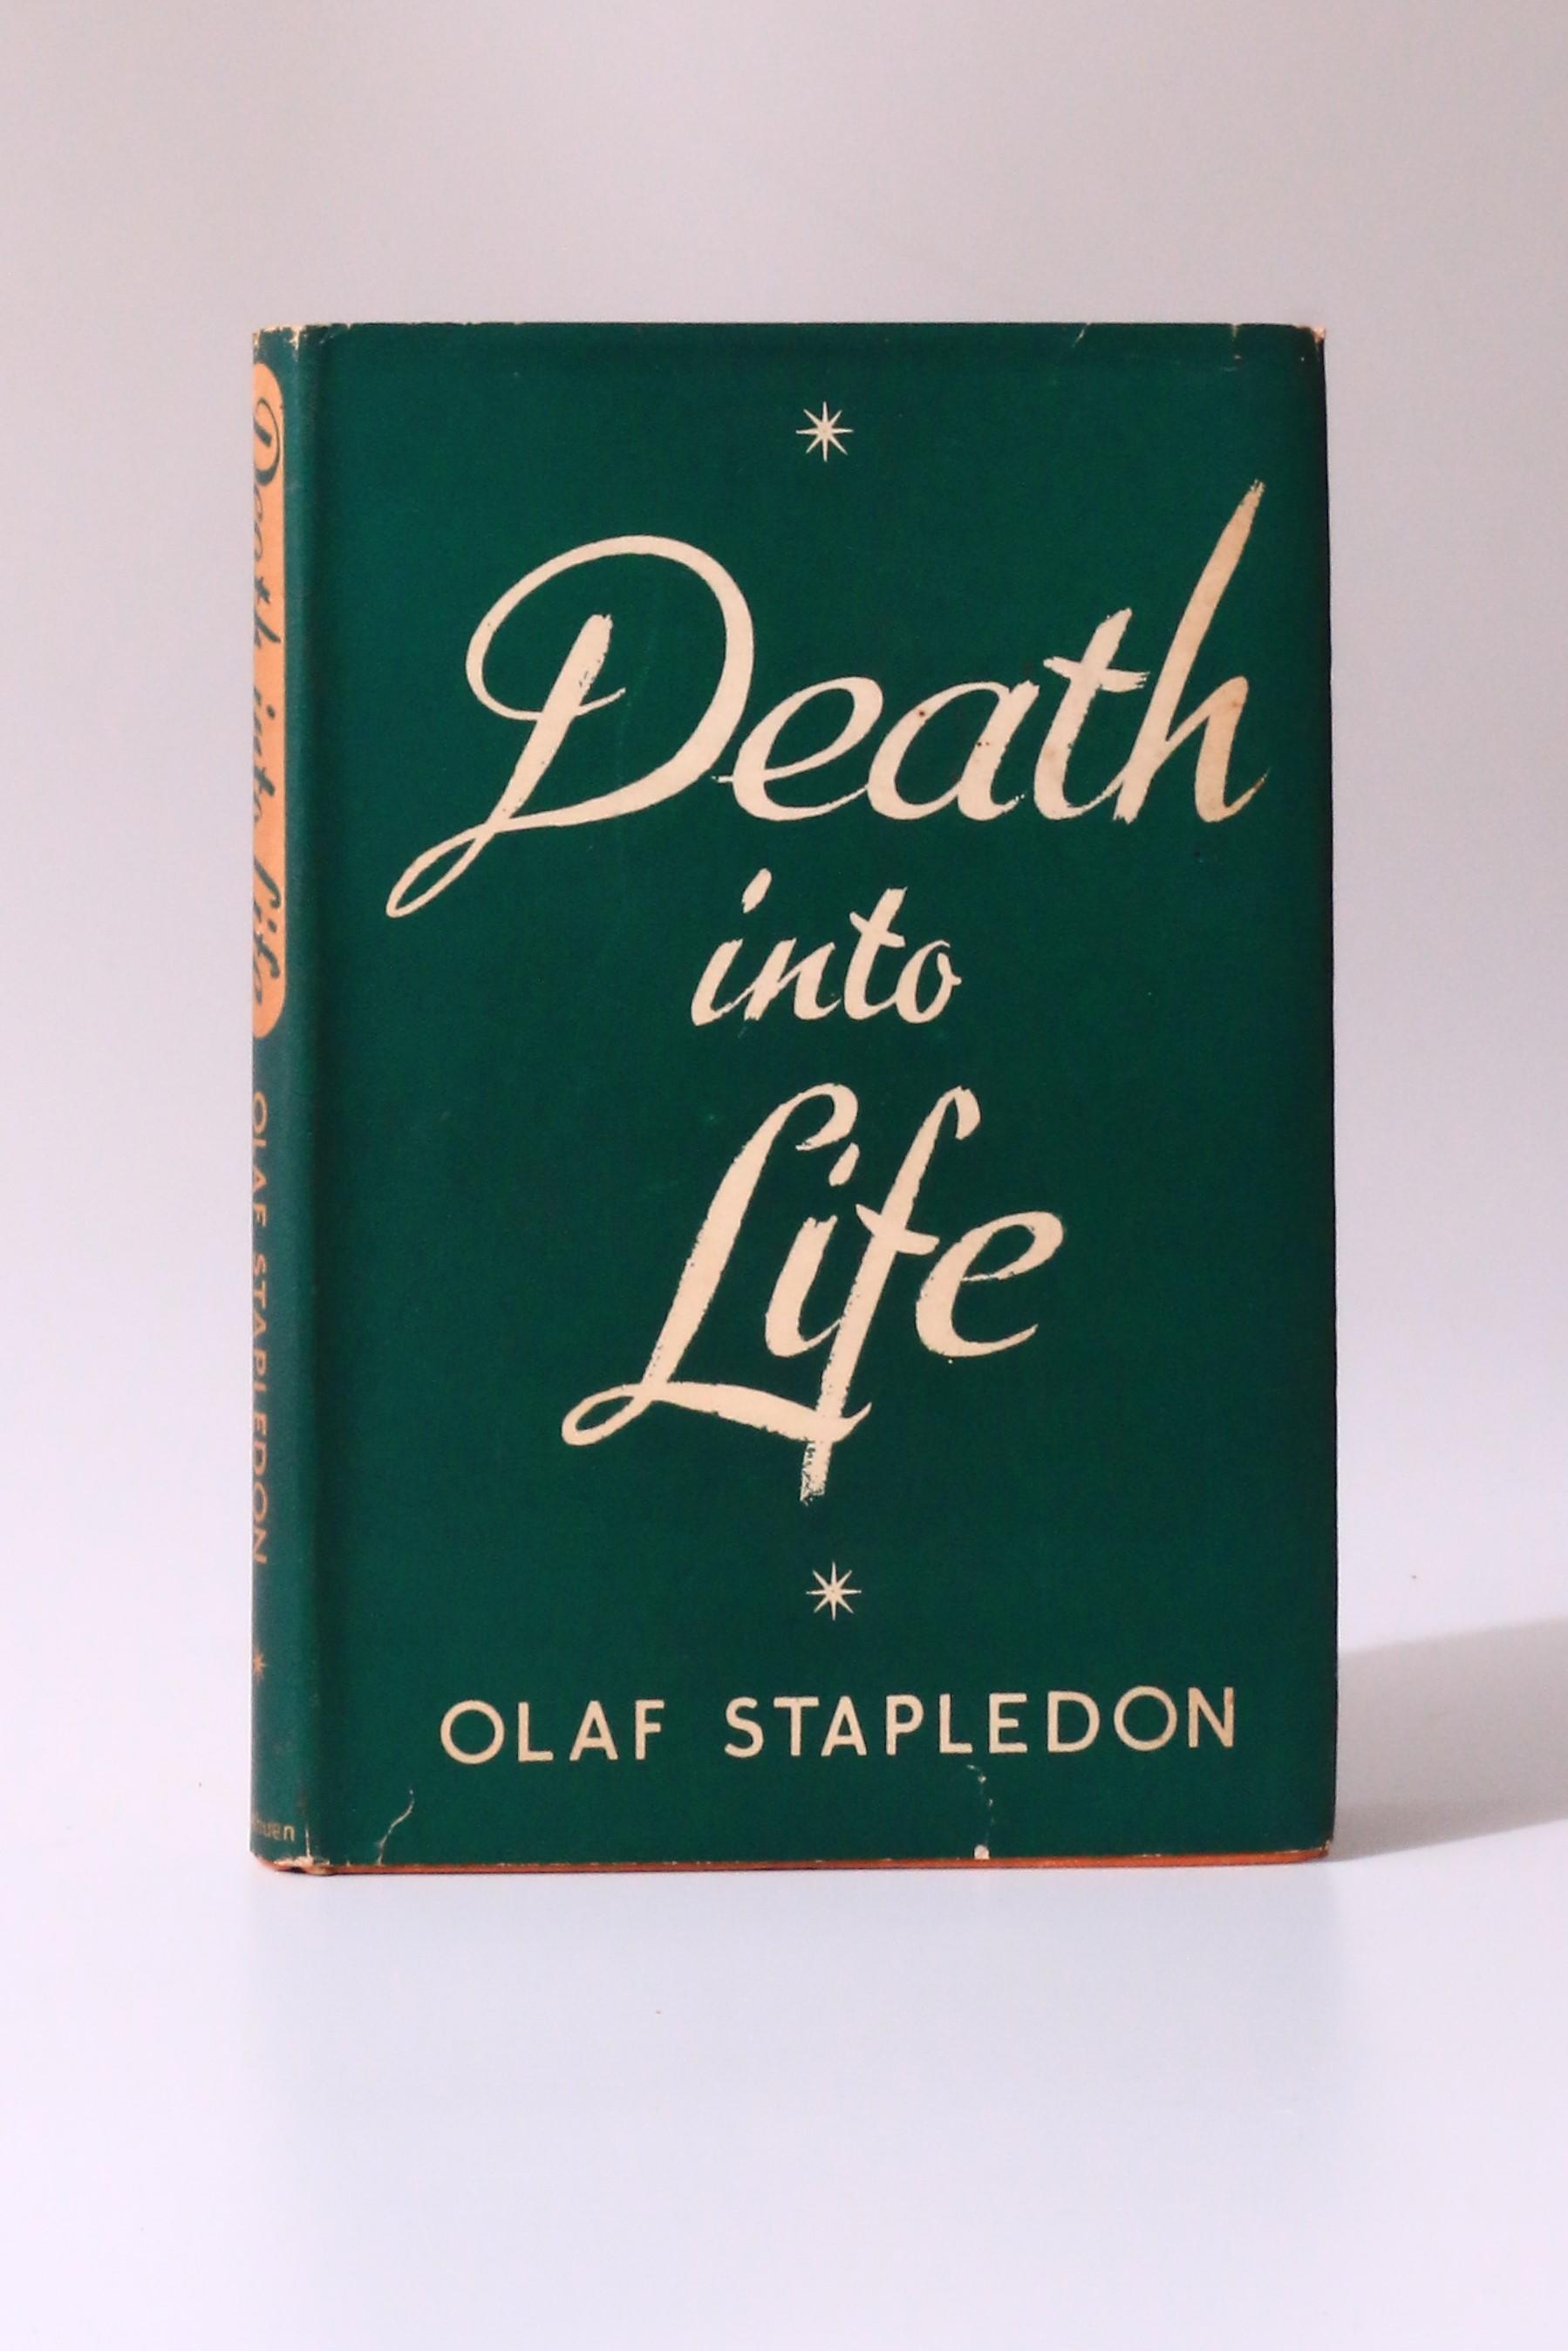 Olaf Stapledon - Death into Life - Methuen, 1946, Signed First Edition.